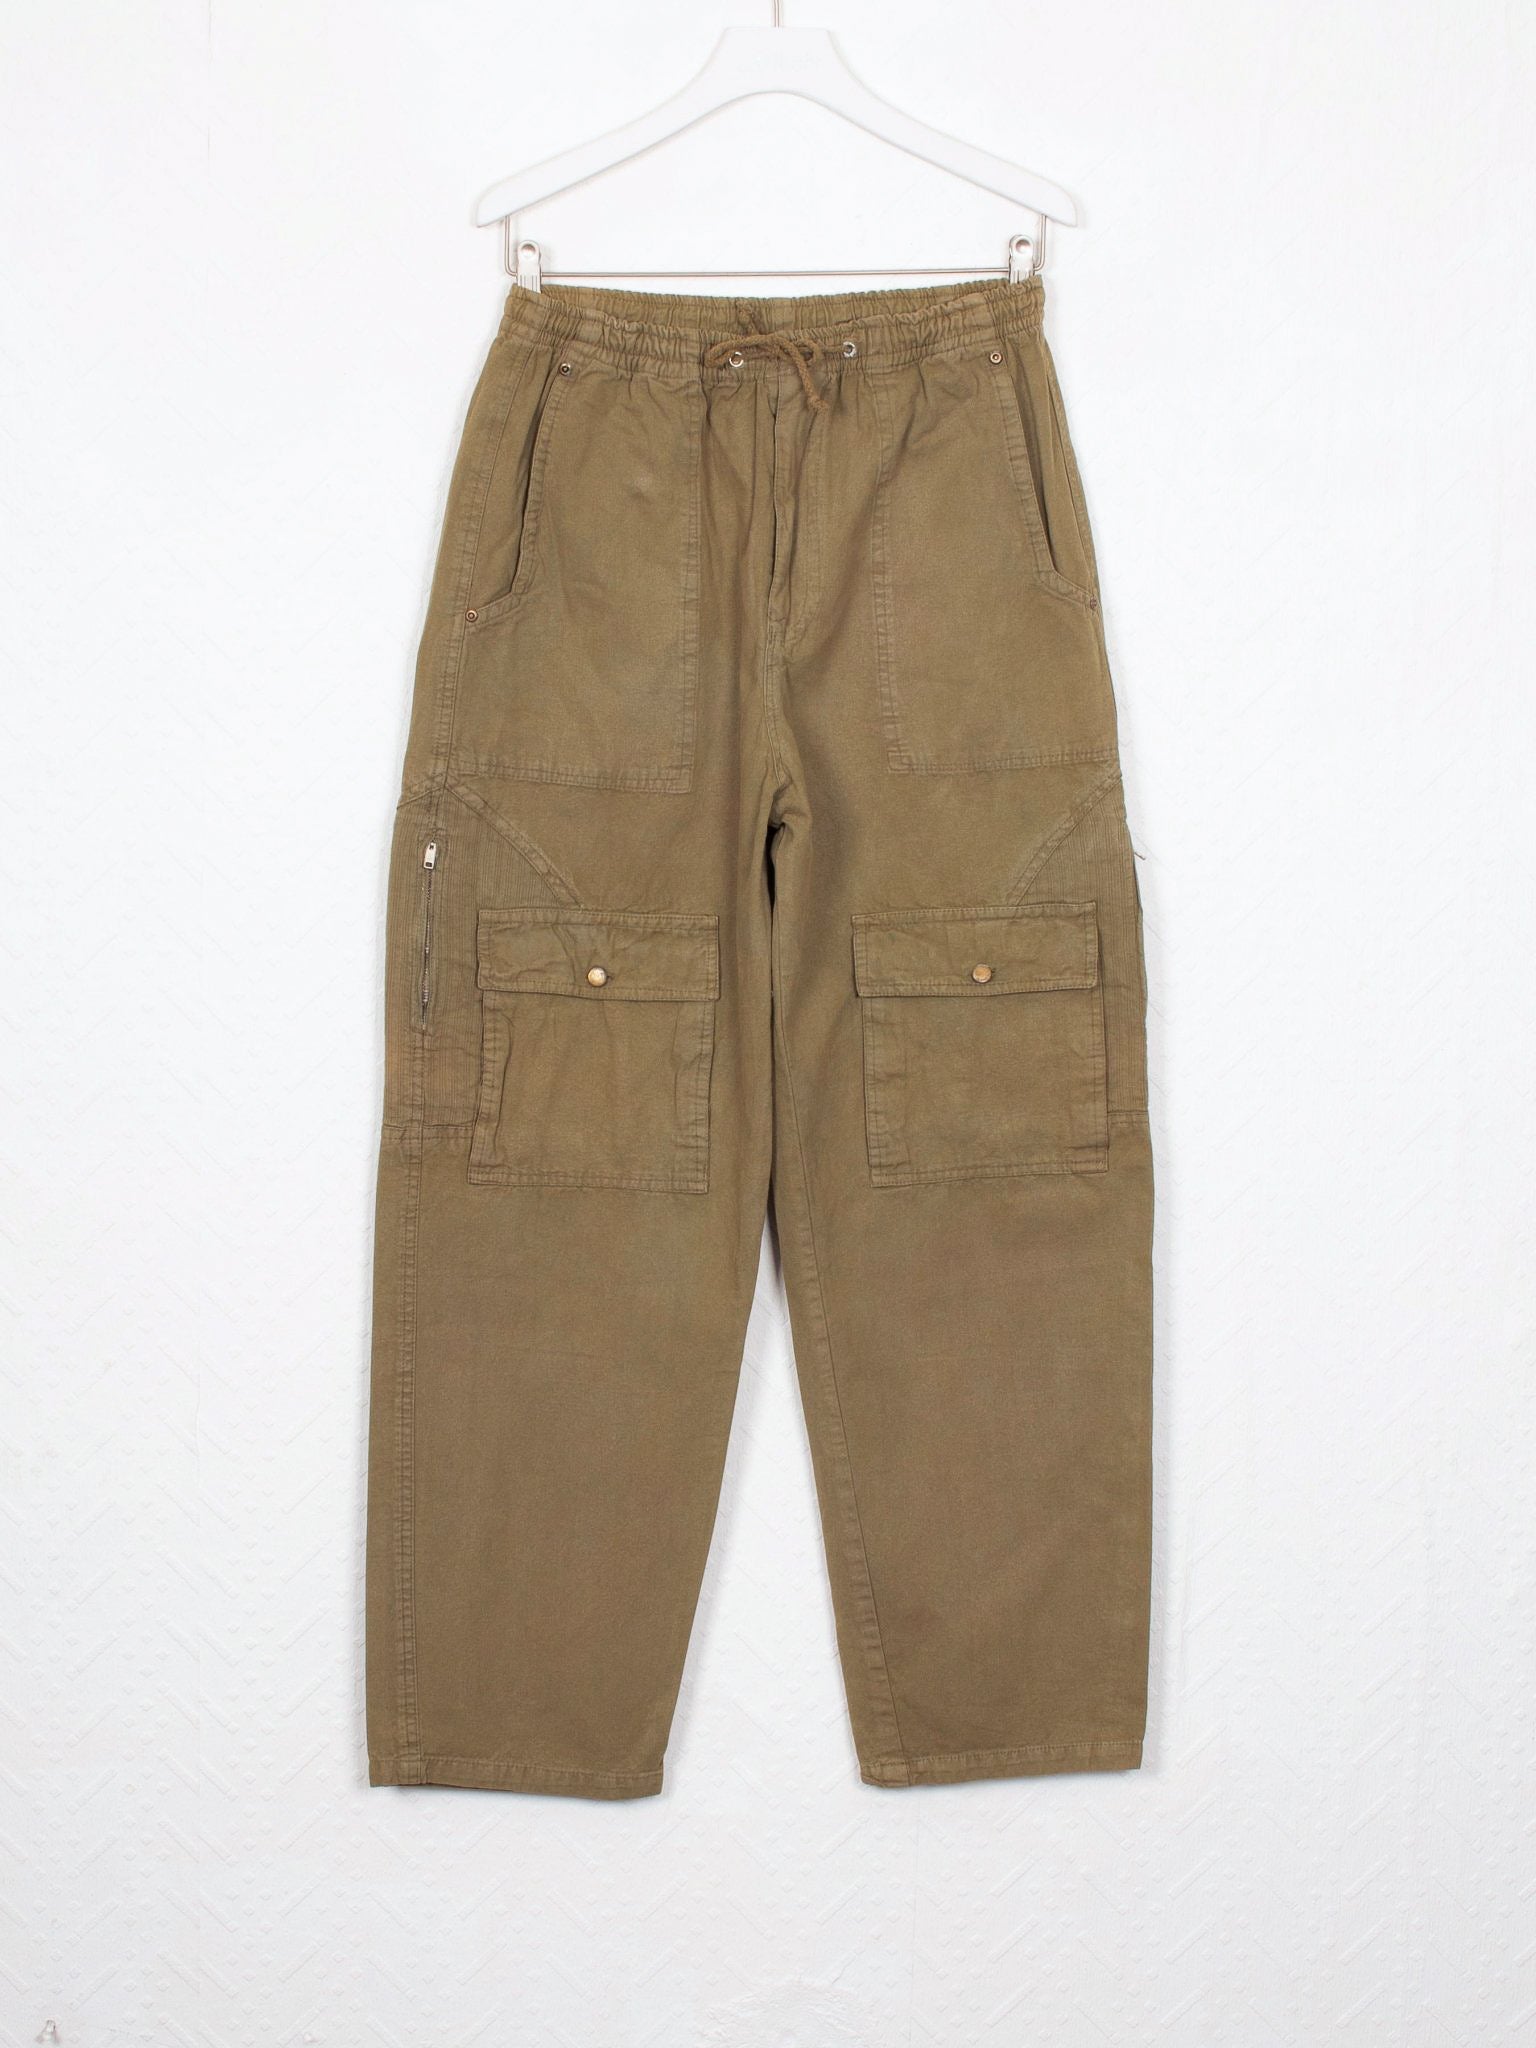 vintage a:(r)kaiv Reworked Vintage Military Trousers